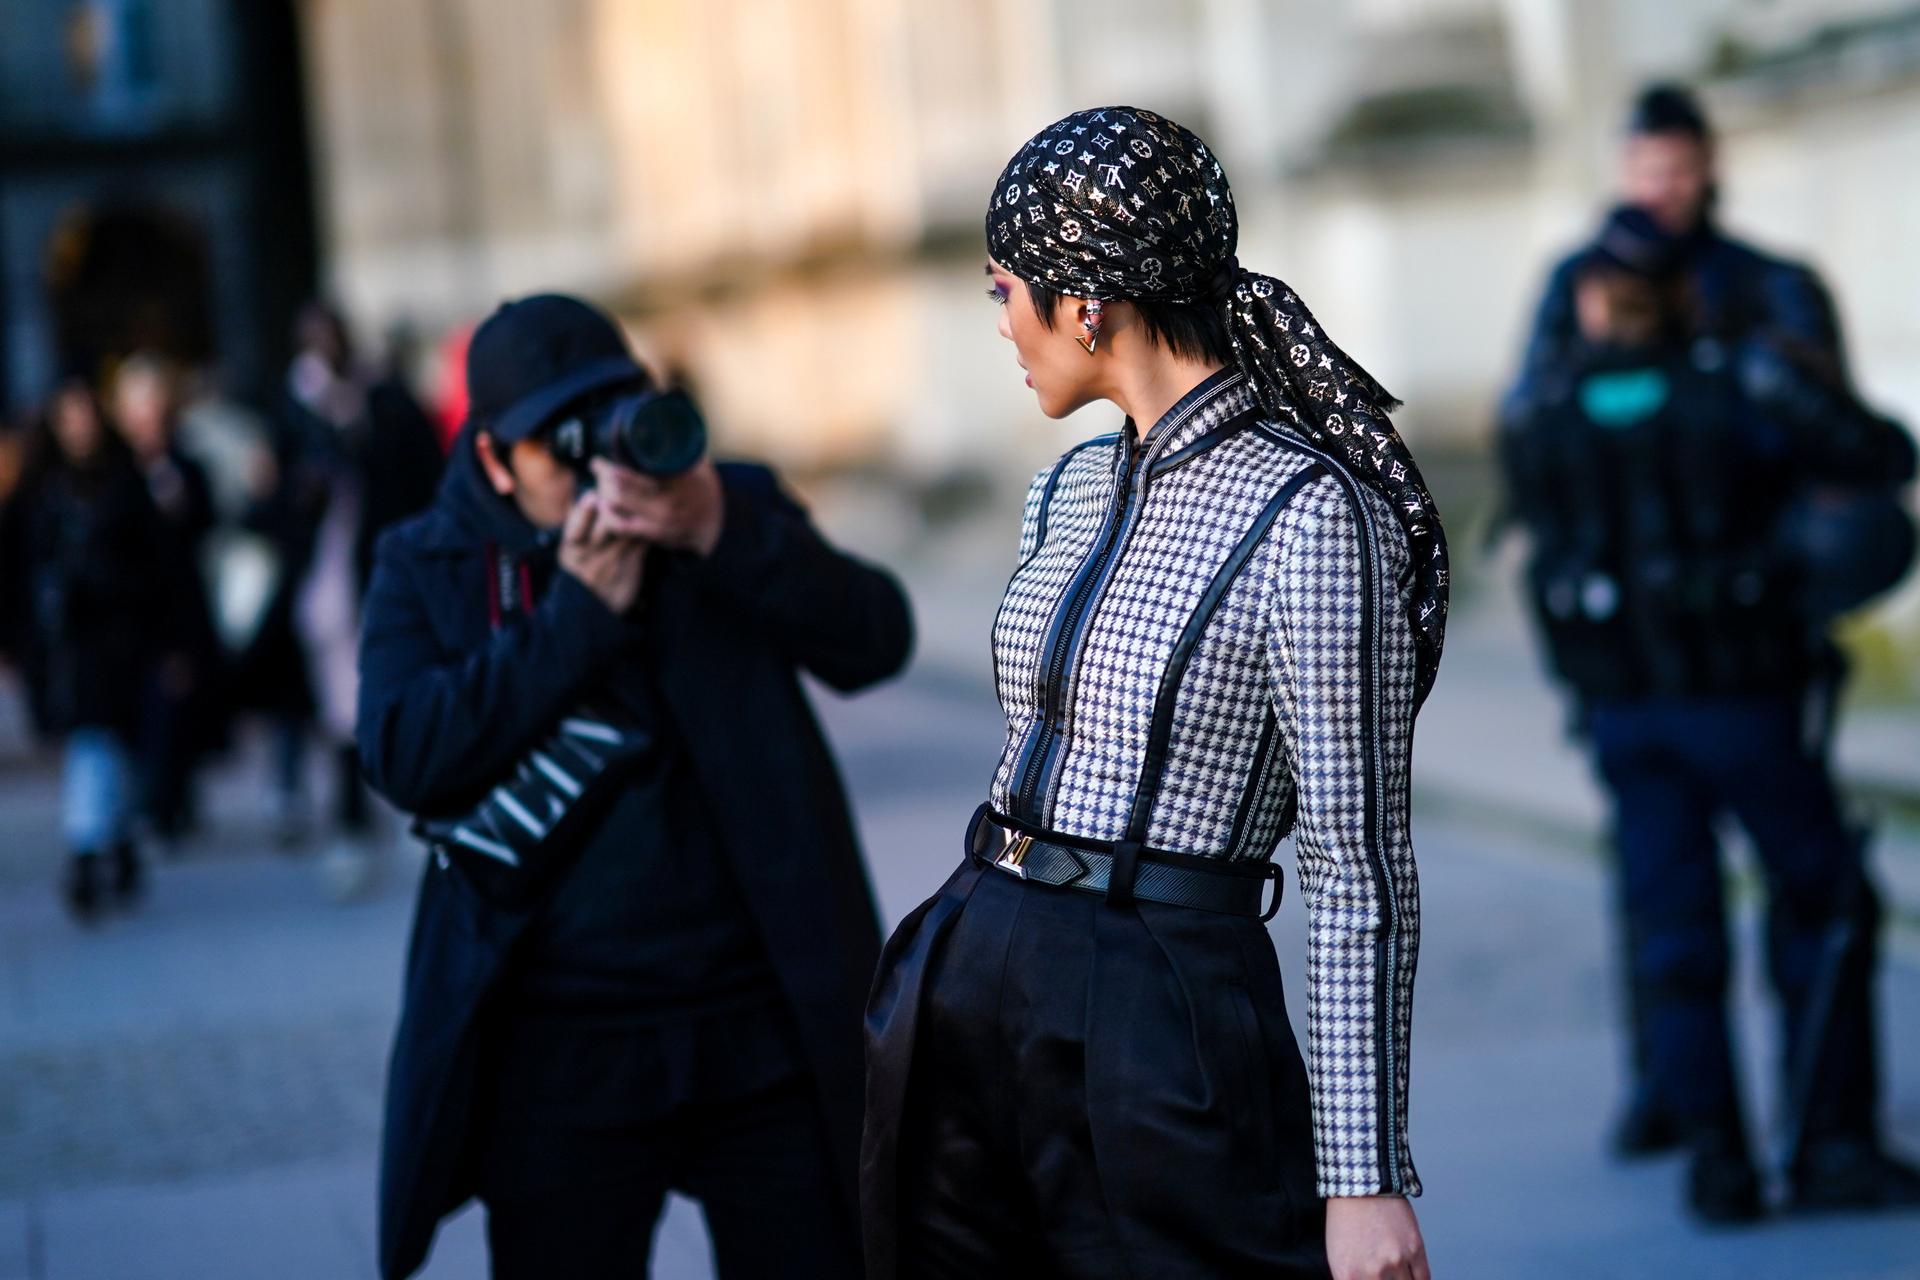 Durags and bandanas in modest fashion: appreciation or appropriation?